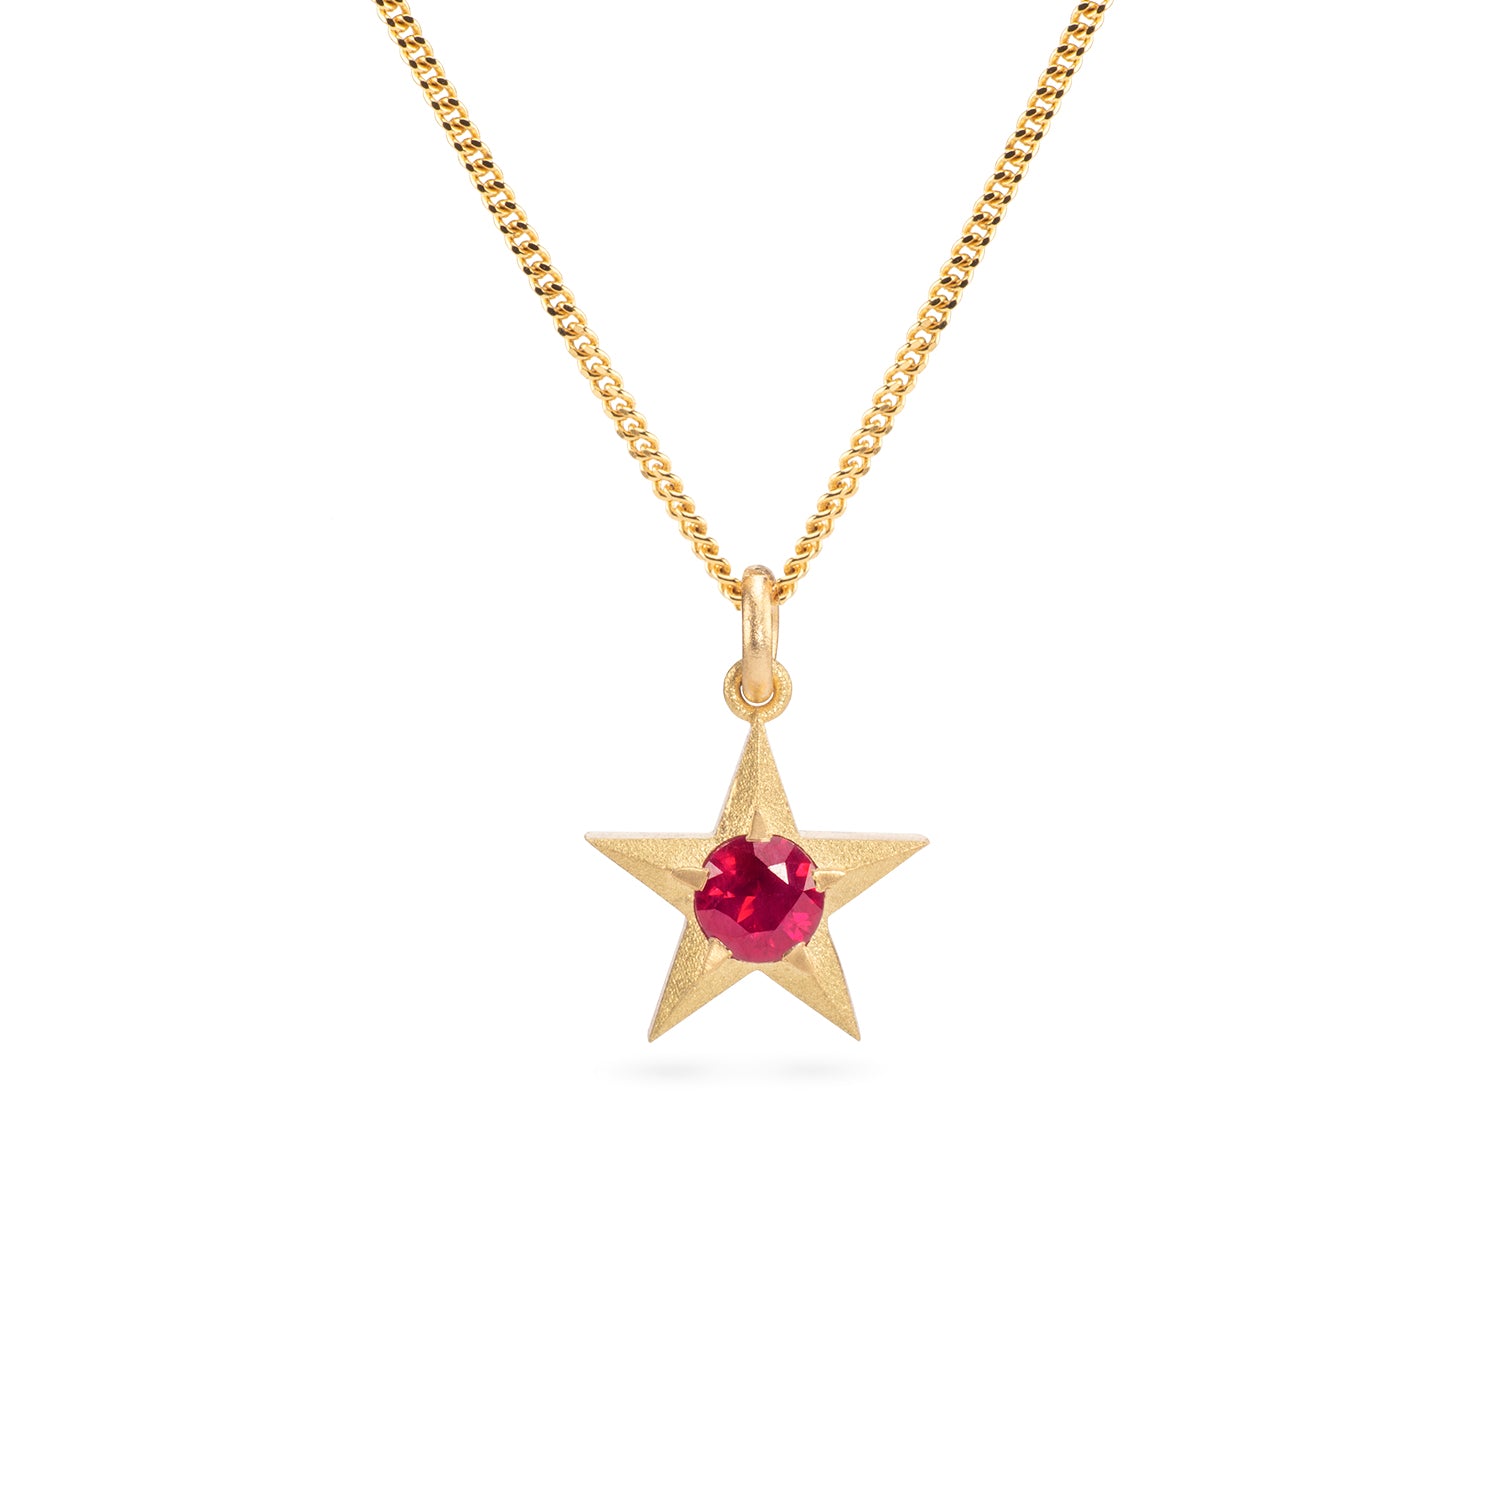 Stella 18ct Gold Star Necklace with Ruby